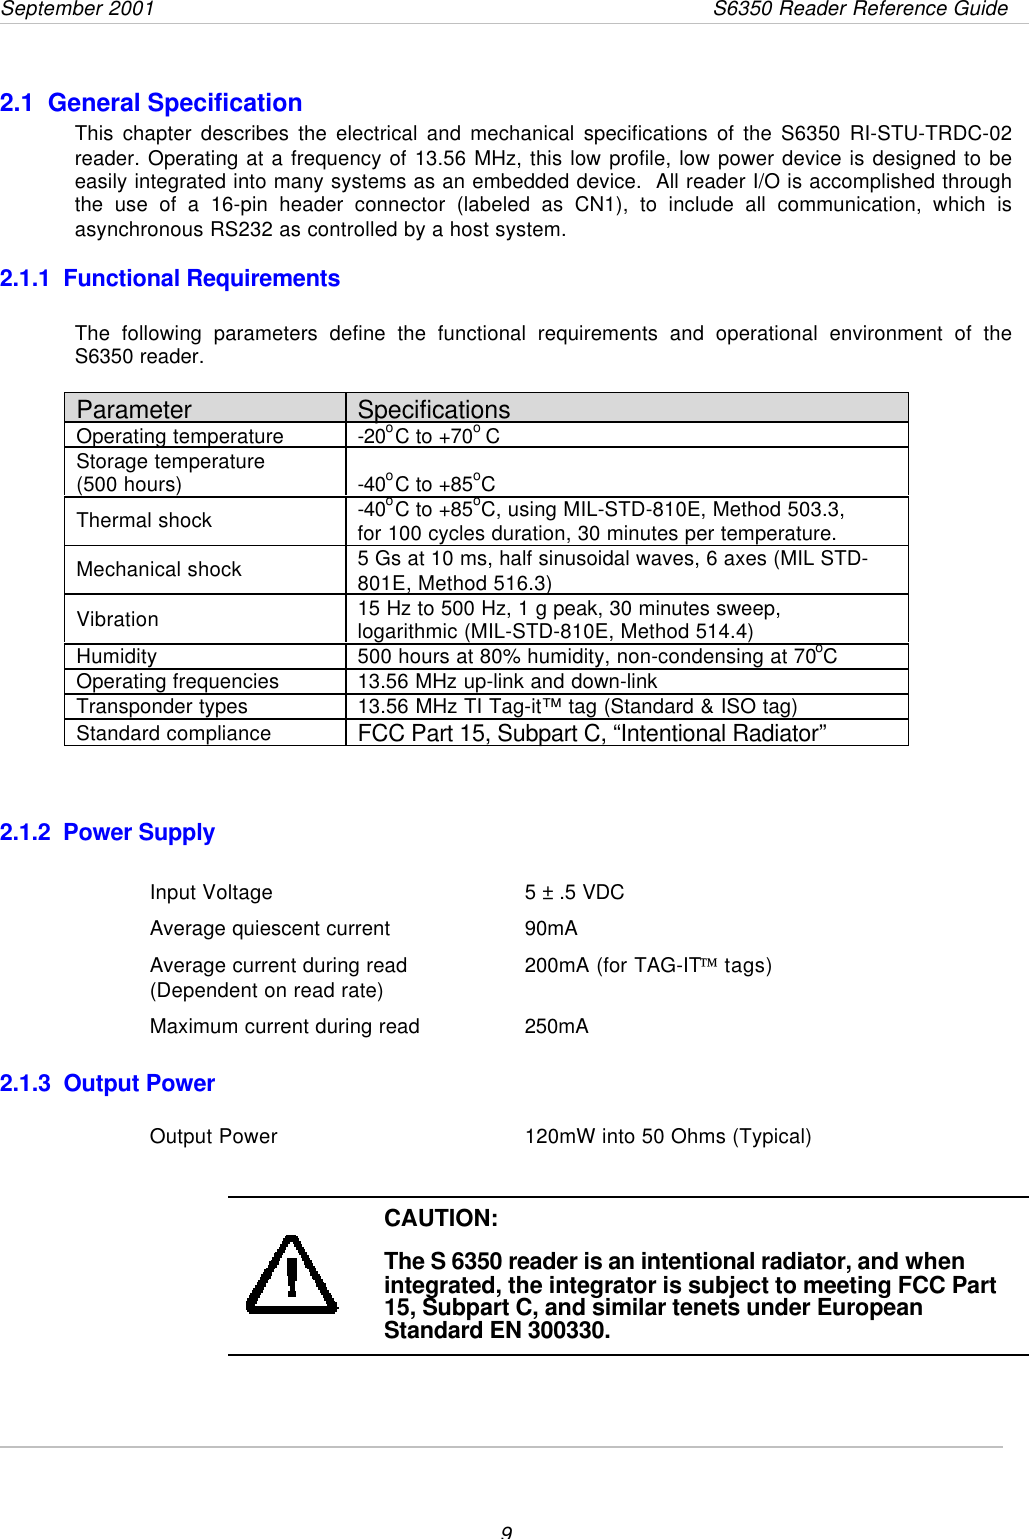 September 2001       S6350 Reader Reference Guide92.1  General SpecificationThis chapter describes the electrical and mechanical specifications of the S6350 RI-STU-TRDC-02reader. Operating at a frequency of 13.56 MHz, this low profile, low power device is designed to beeasily integrated into many systems as an embedded device.  All reader I/O is accomplished throughthe use of a 16-pin header connector (labeled as CN1), to include all communication, which isasynchronous RS232 as controlled by a host system.2.1.1  Functional RequirementsThe following parameters define the functional requirements and operational environment of theS6350 reader. Parameter SpecificationsOperating temperature -20oC to +70o CStorage temperature(500 hours) -40oC to +85oCThermal shock -40oC to +85oC, using MIL-STD-810E, Method 503.3,for 100 cycles duration, 30 minutes per temperature.Mechanical shock 5 Gs at 10 ms, half sinusoidal waves, 6 axes (MIL STD-801E, Method 516.3)Vibration 15 Hz to 500 Hz, 1 g peak, 30 minutes sweep,logarithmic (MIL-STD-810E, Method 514.4)Humidity 500 hours at 80% humidity, non-condensing at 70oCOperating frequencies 13.56 MHz up-link and down-linkTransponder types 13.56 MHz TI Tag-it™ tag (Standard &amp; ISO tag)Standard compliance FCC Part 15, Subpart C, “Intentional Radiator”  2.1.2  Power SupplyInput Voltage 5 ± .5 VDCAverage quiescent current 90mAAverage current during read 200mA (for TAG-IT tags)(Dependent on read rate)Maximum current during read 250mA2.1.3  Output PowerOutput Power 120mW into 50 Ohms (Typical)CAUTION:The S 6350 reader is an intentional radiator, and whenintegrated, the integrator is subject to meeting FCC Part15, Subpart C, and similar tenets under EuropeanStandard EN 300330.